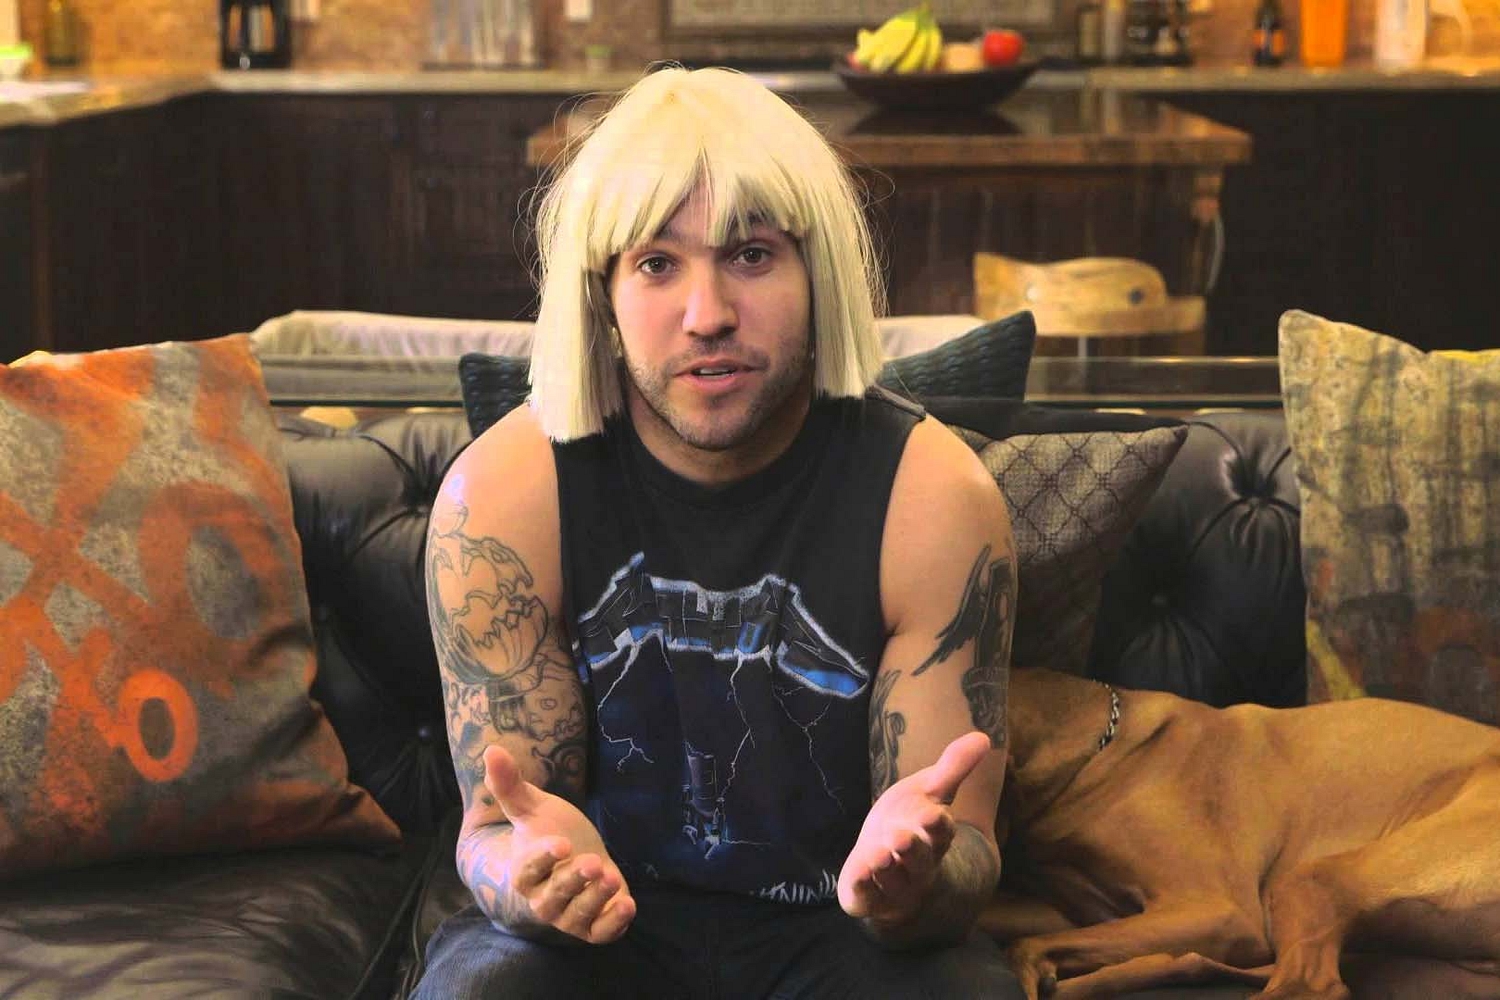 Sia wins third straight songwriter APRA Music Award, Fall Out Boy's Pete Wentz dons wig to accept